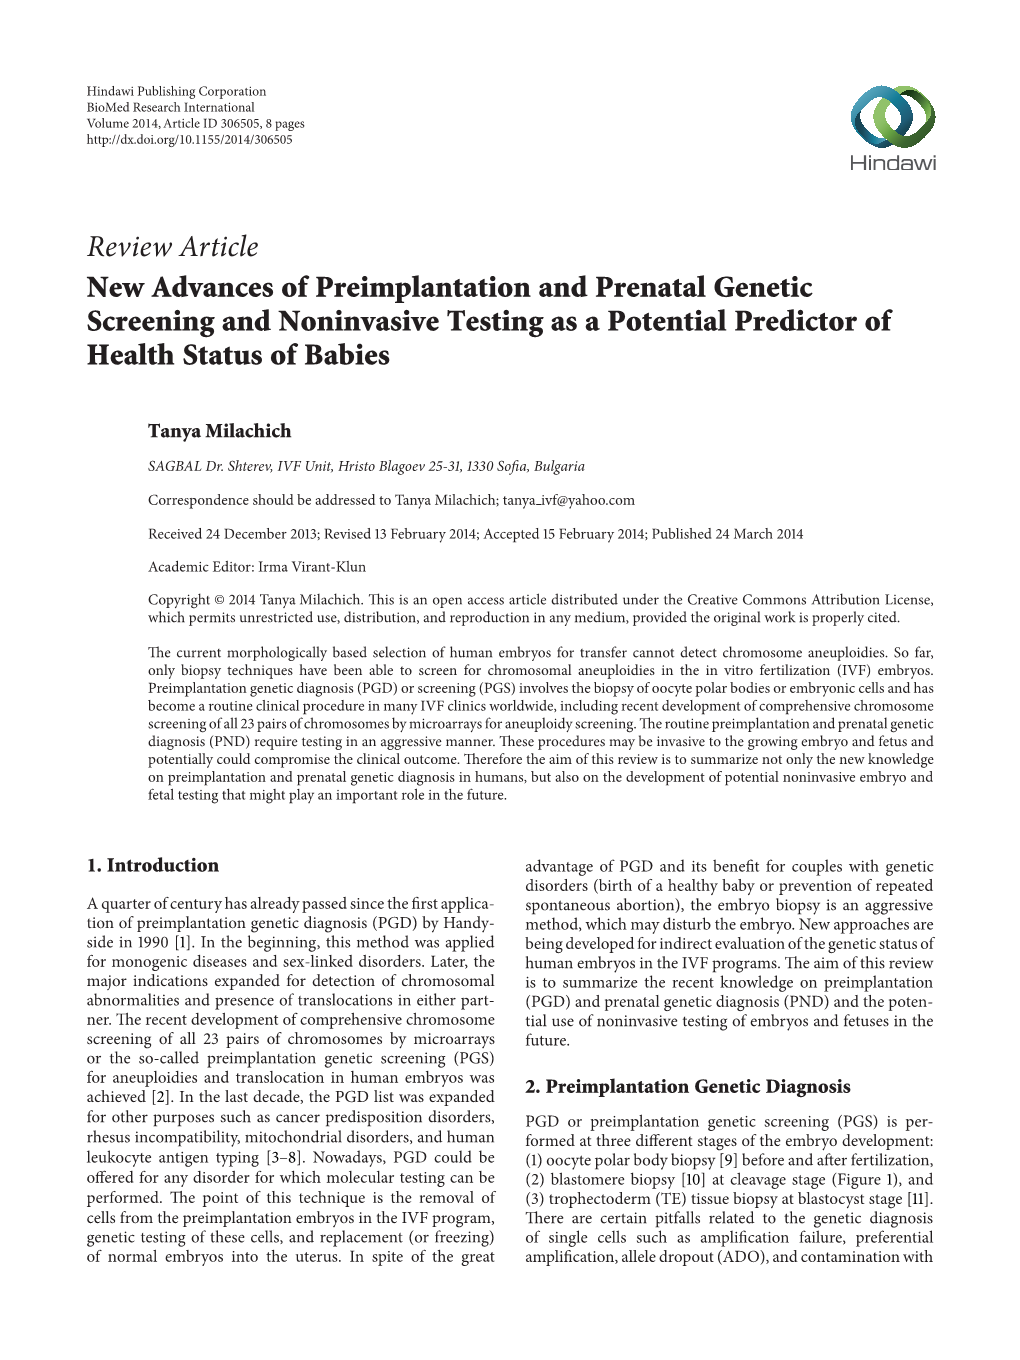 New Advances of Preimplantation and Prenatal Genetic Screening and Noninvasive Testing As a Potential Predictor of Health Status of Babies